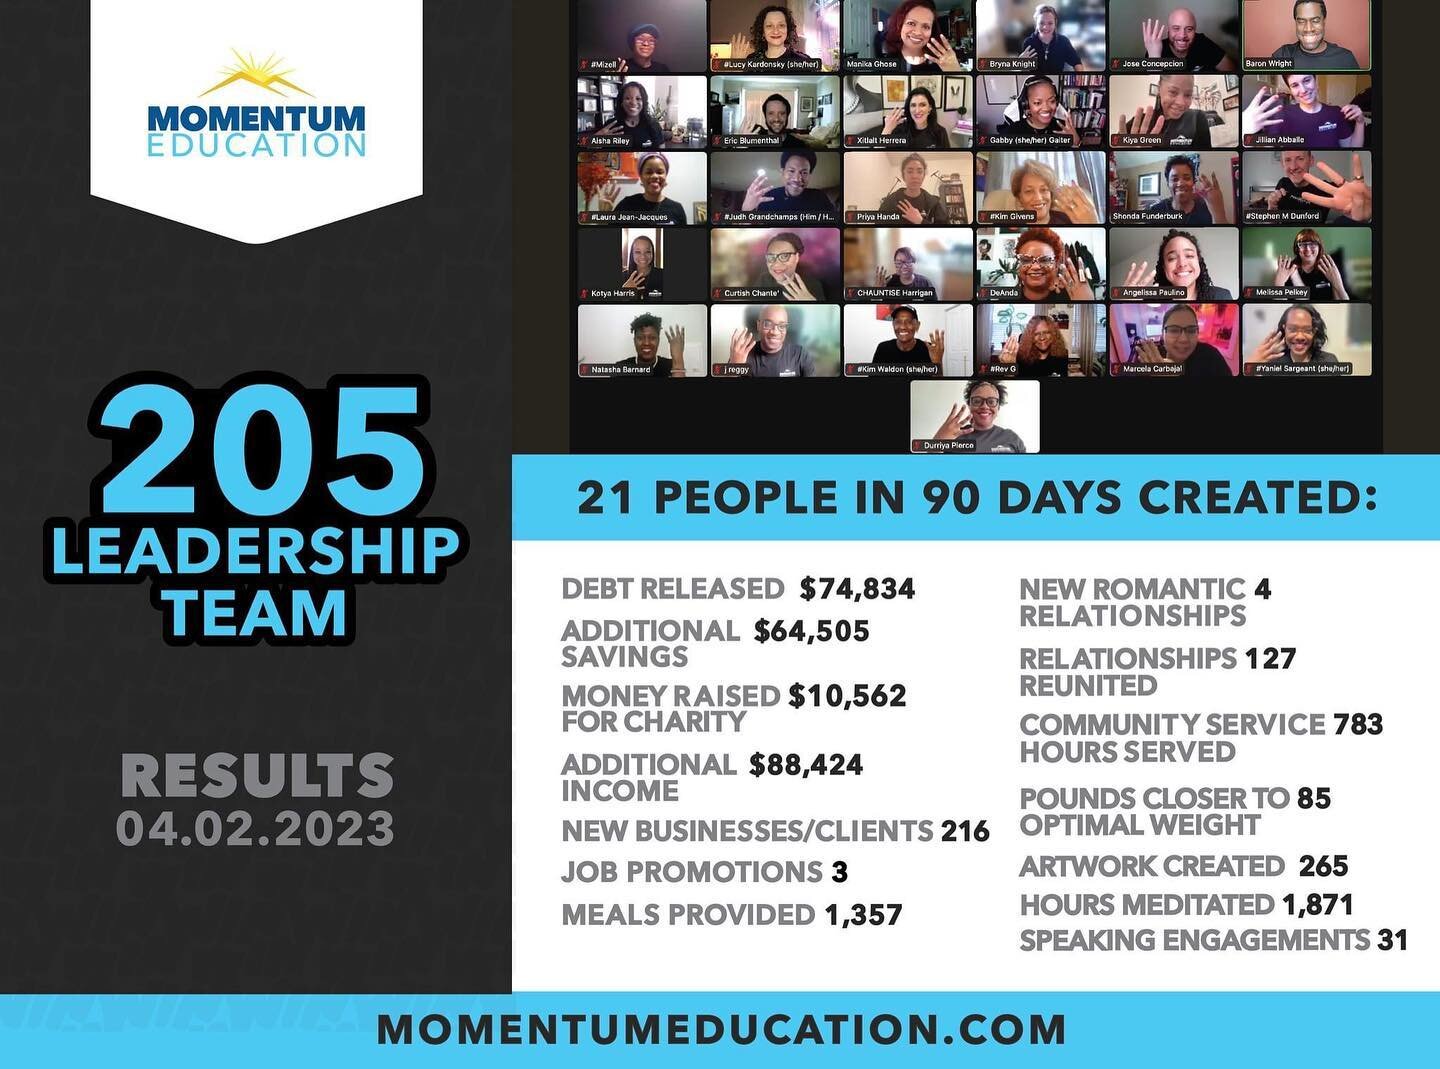 Repost: ❤️👏🏾🦋🎓🙌🏿

Congratulations to Momentum Education's Virtual Leadership Team 205 and BIG RESULTS IN ONLY 90-DAYS! A big thank you to Coordinator Baron Wright for leading this team of 21 incredible leaders to results that speak for themselv